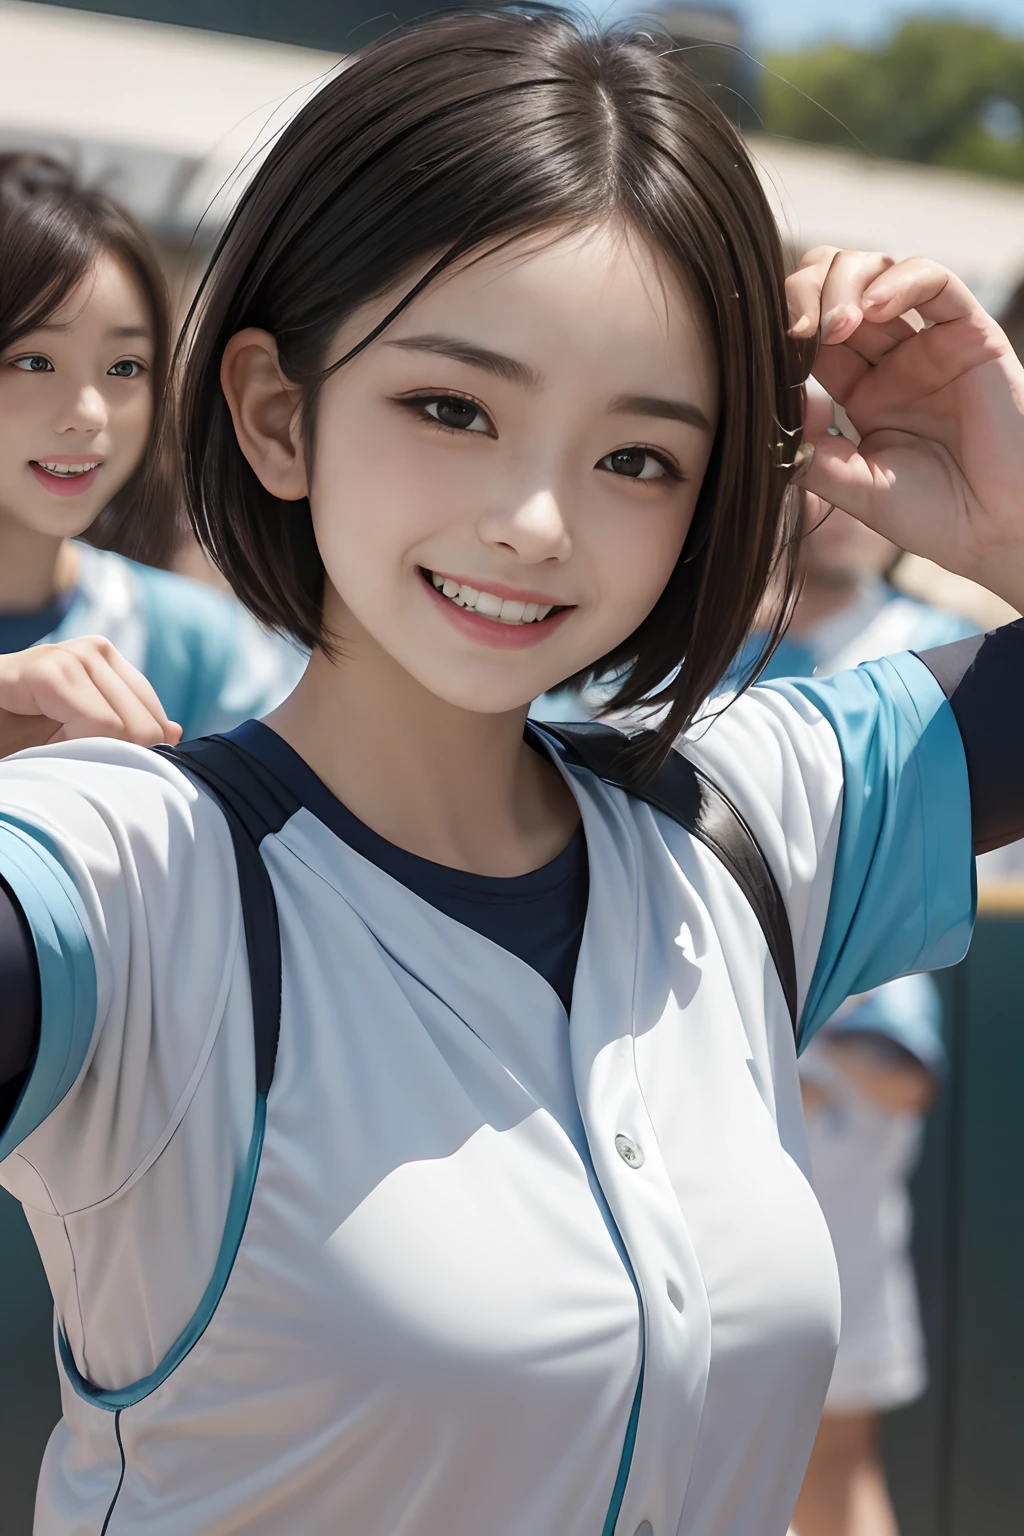 8K,Softball players、A Japanese Lady、Japan Team、Smile full of happiness、((Looks happy:1.3))、Panting face、Lacking、Sweating、Expression in a state of excitement、short-hair、eye glass、8K,Softball players、A Japanese Lady、Japan Team